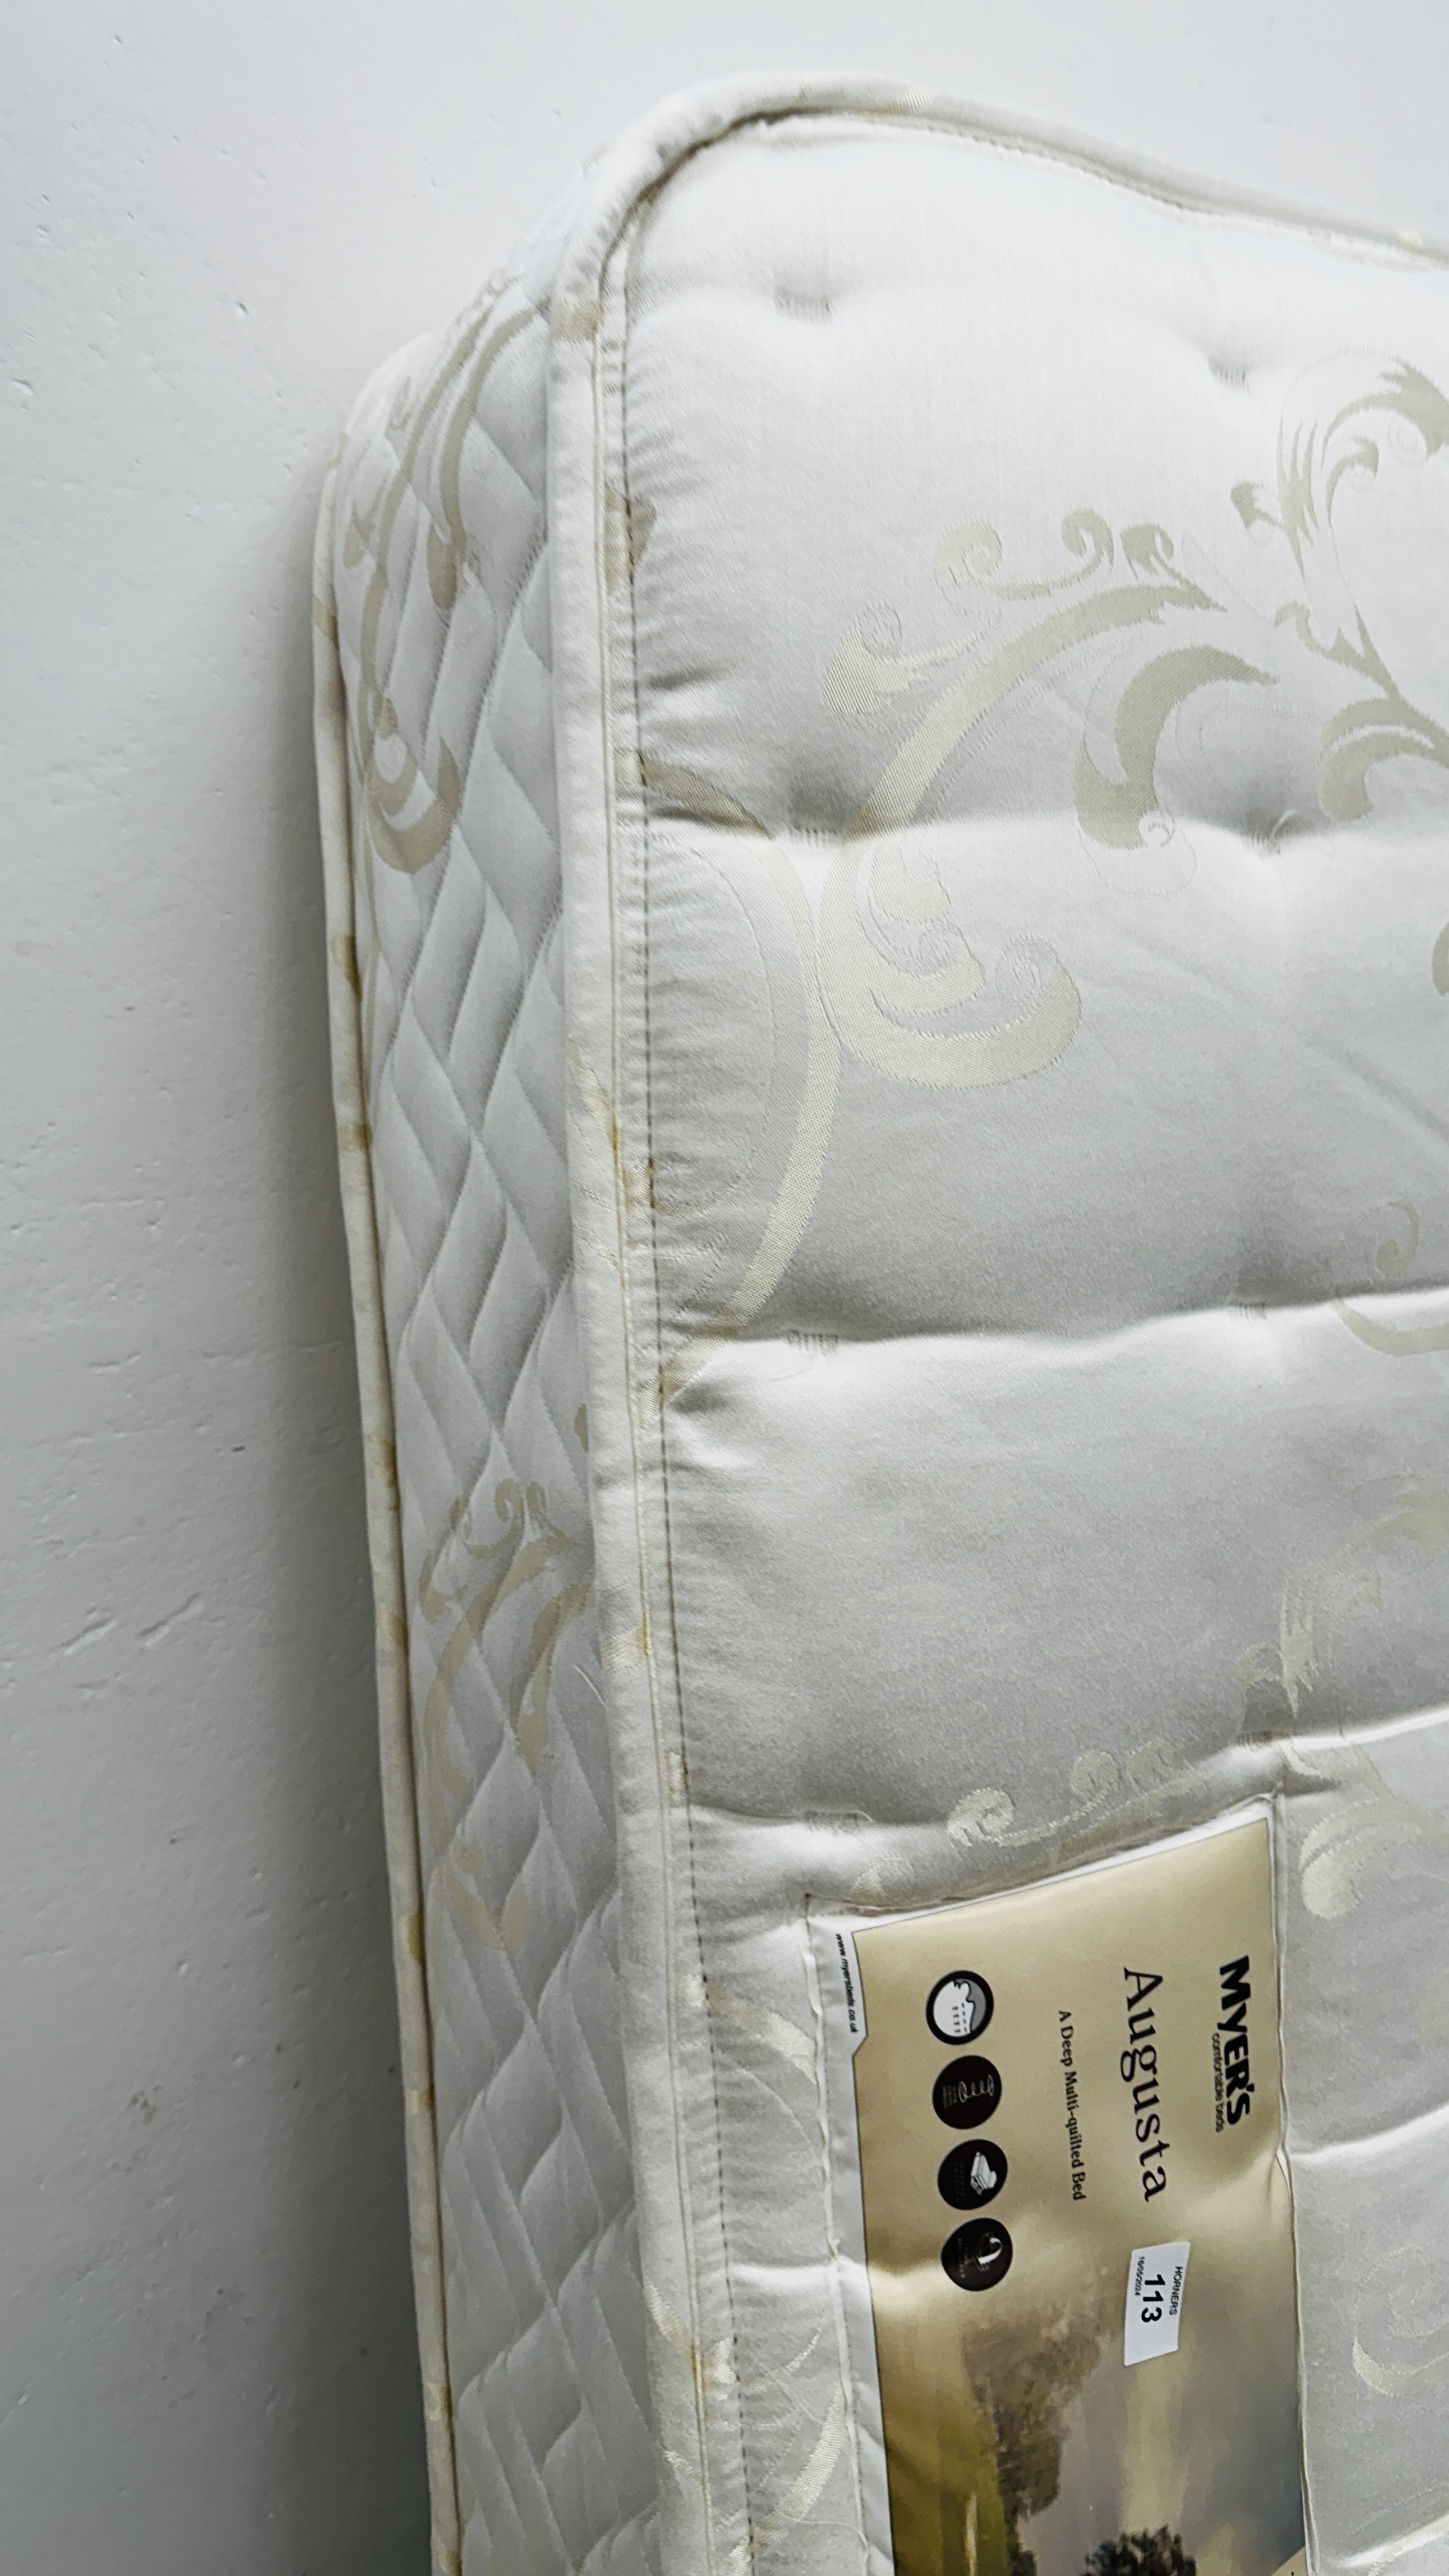 MYERS "AUGUSTA" DEEP QUILTED DOUBLE MATTRESS. - Image 10 of 10